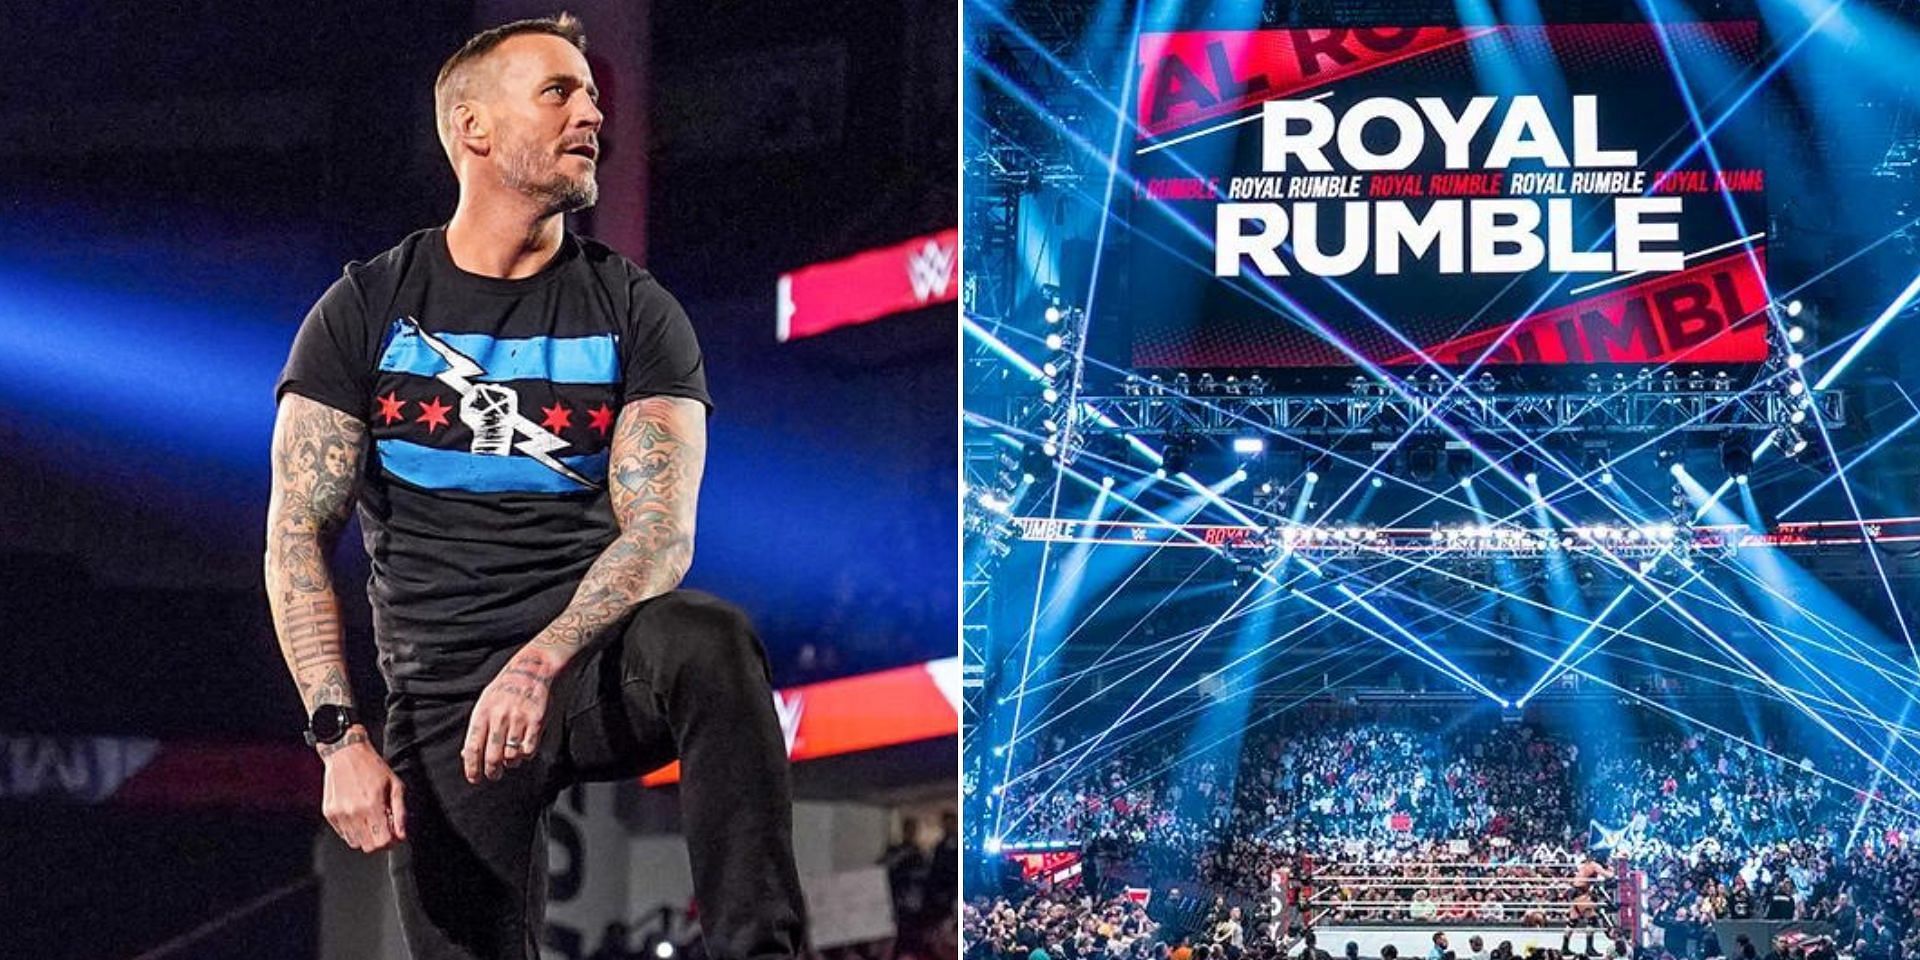 How does CM Punk feel about entering the Royal Rumble at #1?